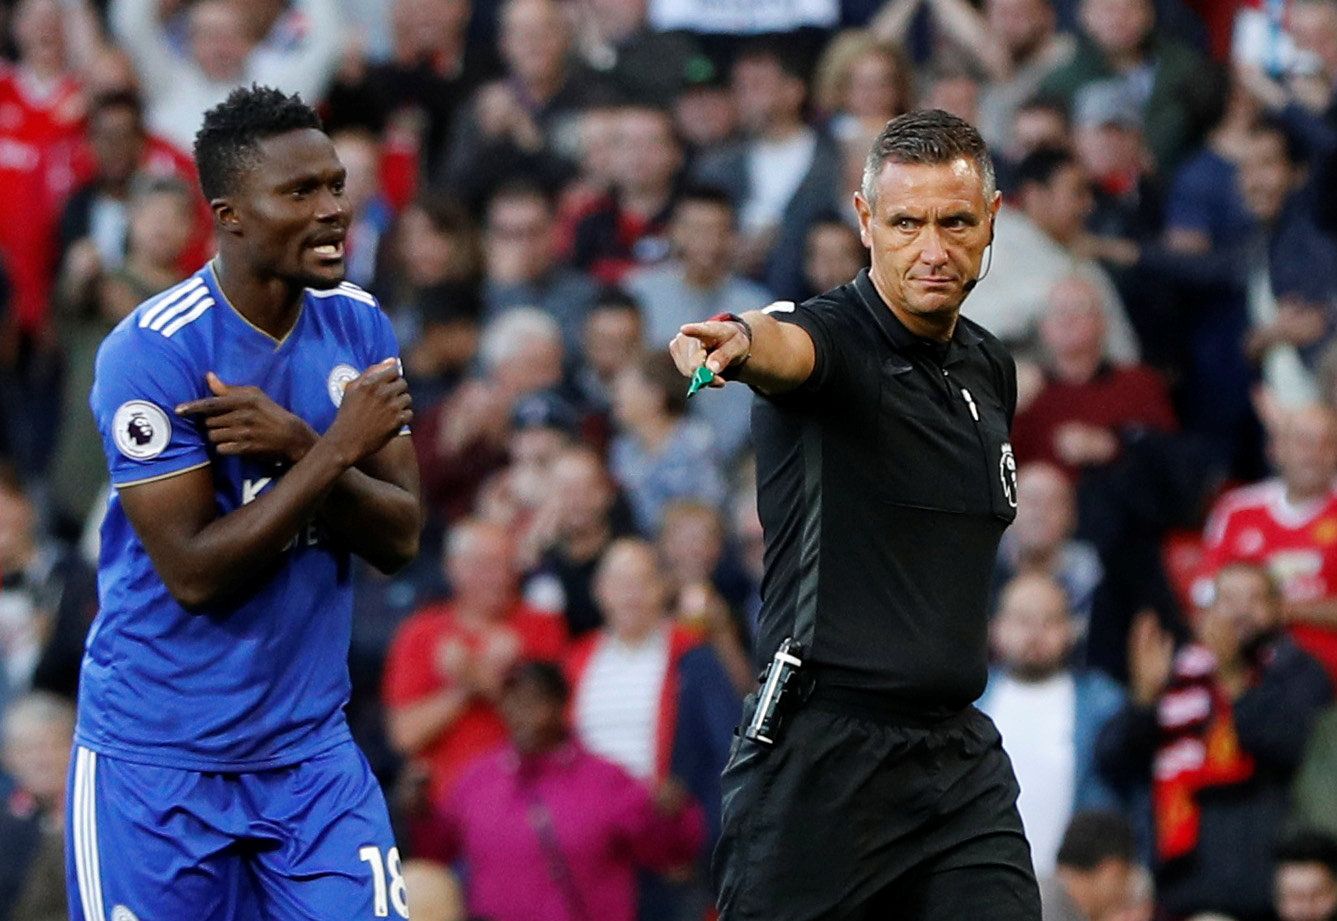 Soccer Football - Premier League - Manchester United v Leicester City - Old Trafford, Manchester, Britain - August 10, 2018  Referee Andre Marriner awards a penalty to Manchester United as Leicester City's Daniel Amartey reacts  Action Images via Reuters/Andrew Boyers  EDITORIAL USE ONLY. No use with unauthorized audio, video, data, fixture lists, club/league logos or 